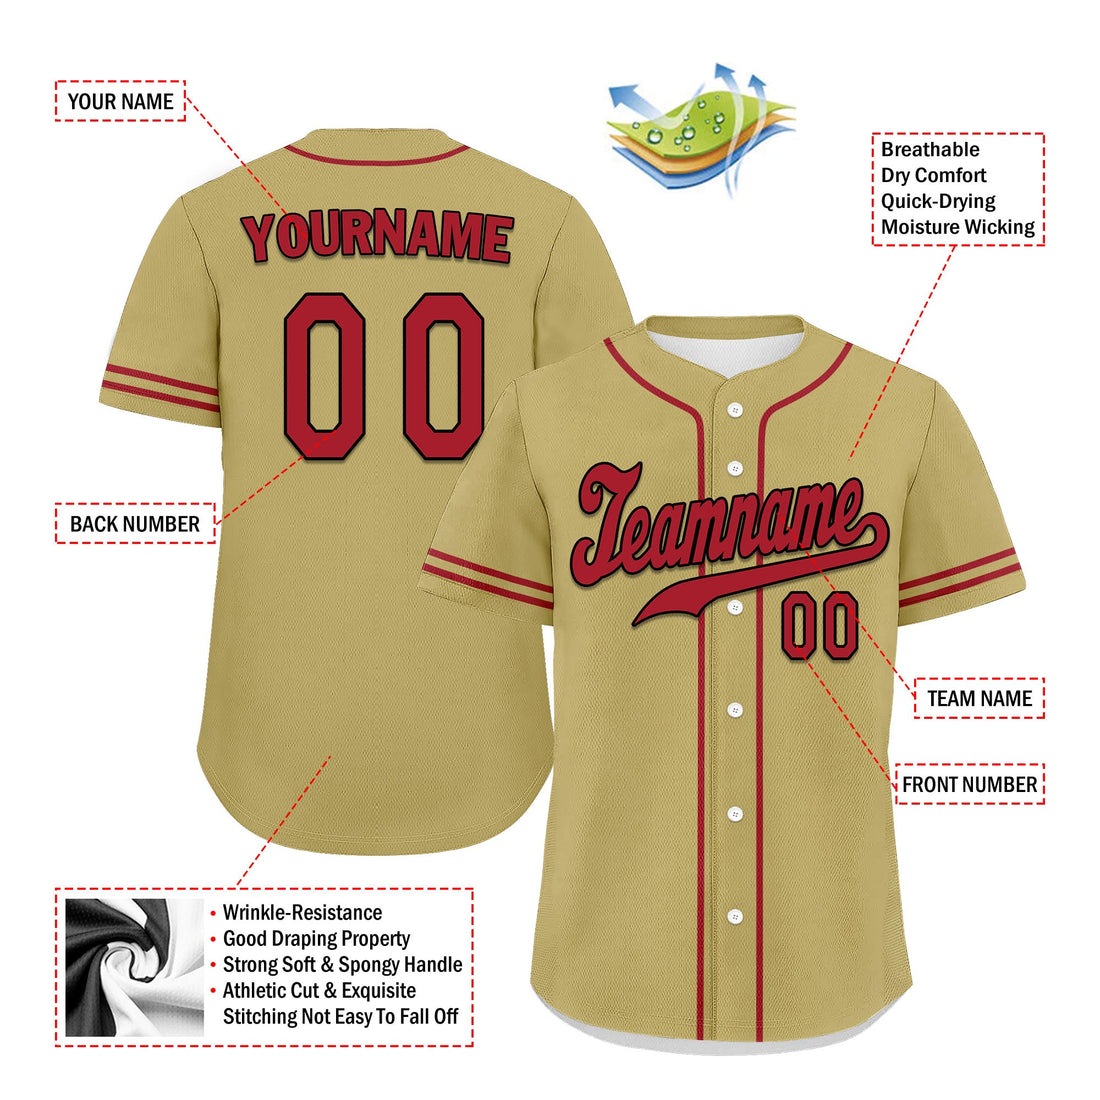 Custom Yellow Classic Style Red Personalized Authentic Baseball Jersey UN002-bd0b00d8-7